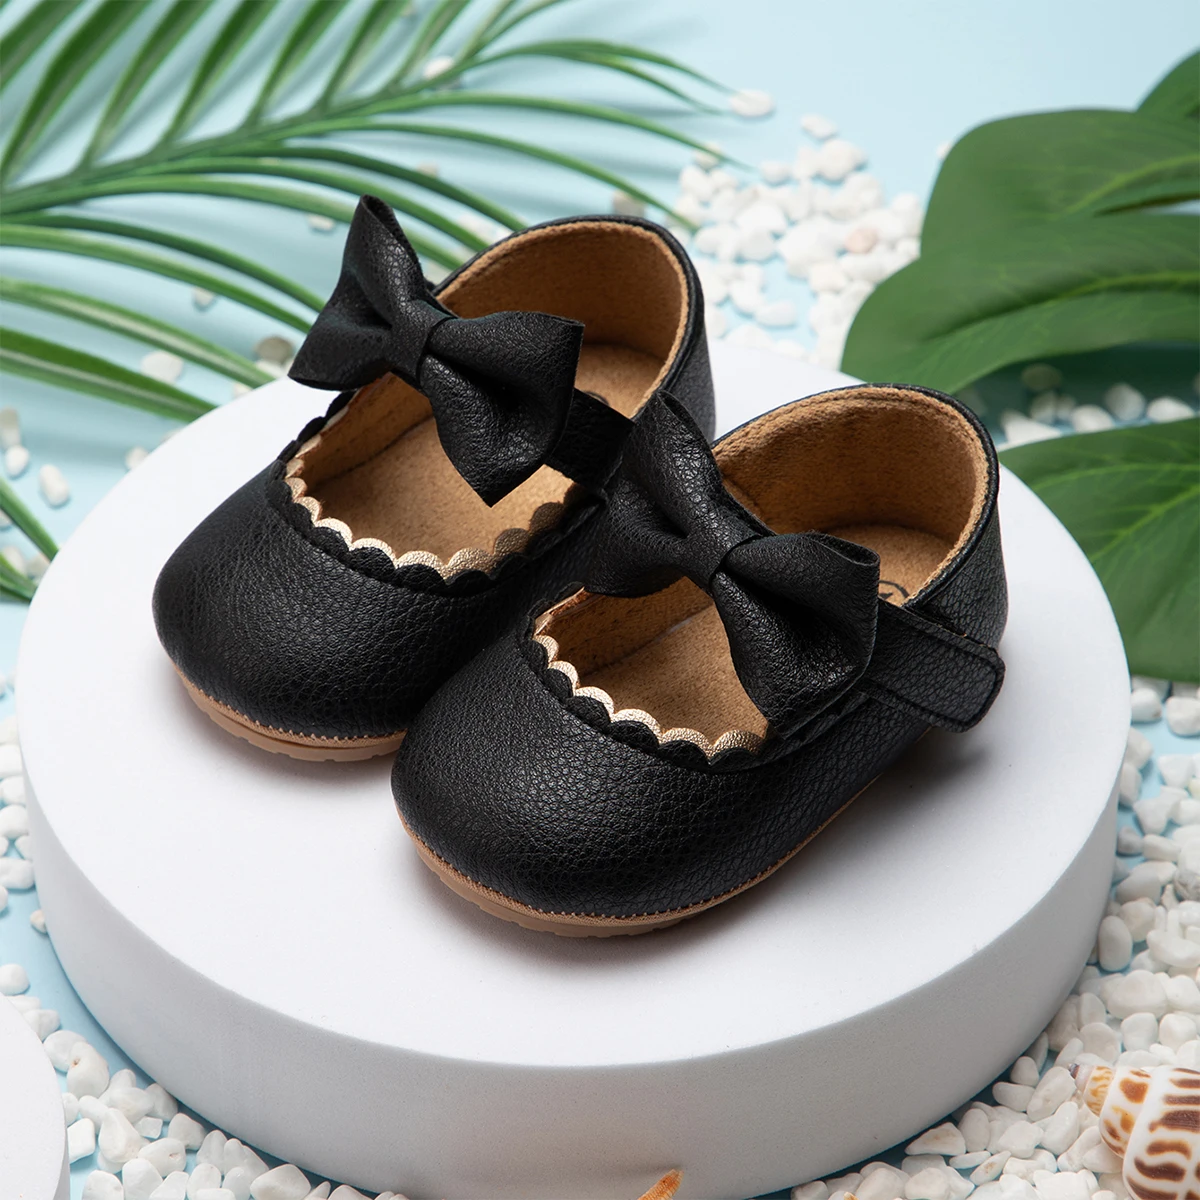 KIDSUN Baby Casual Shoes Infant Toddler Bowknot Non-slip Rubber Soft-Sole Flat PU First Walker Newborn Baby Girl Accessories